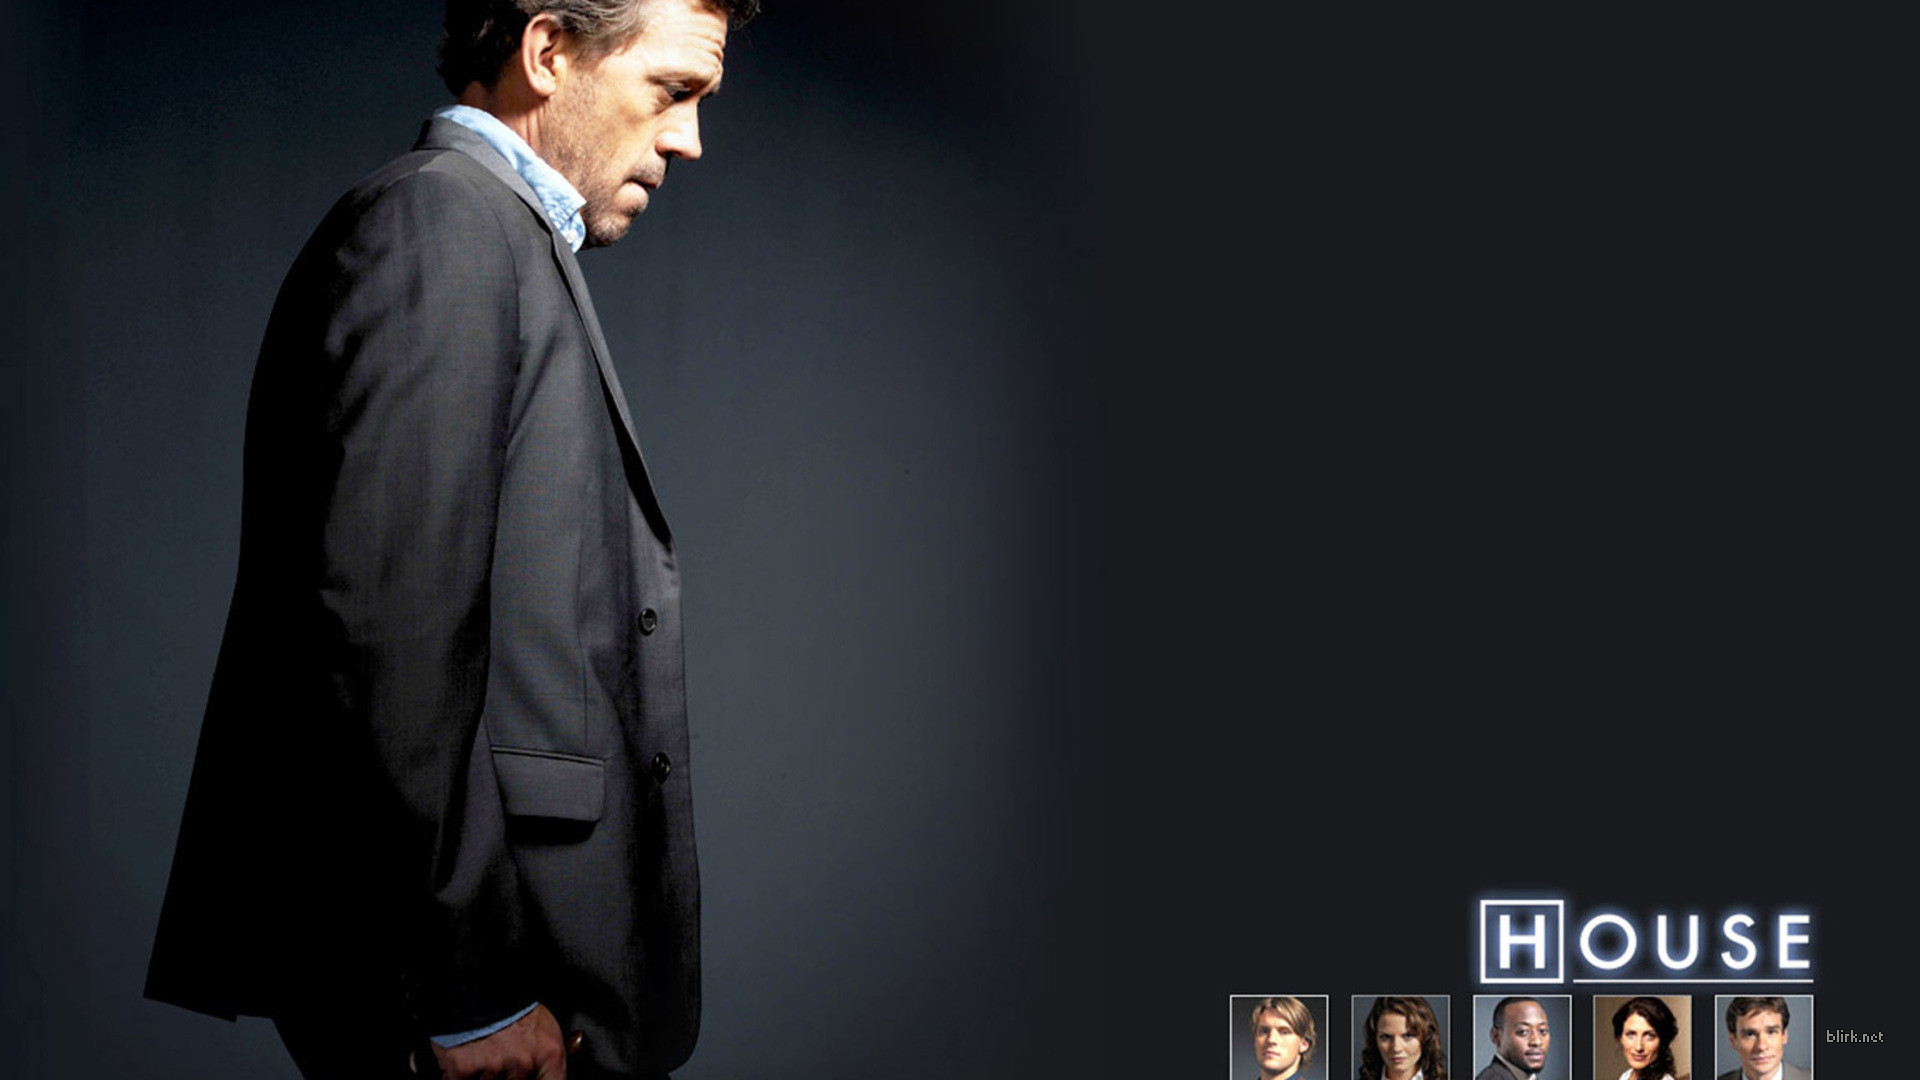 House MD house md HD phone wallpaper  Peakpx